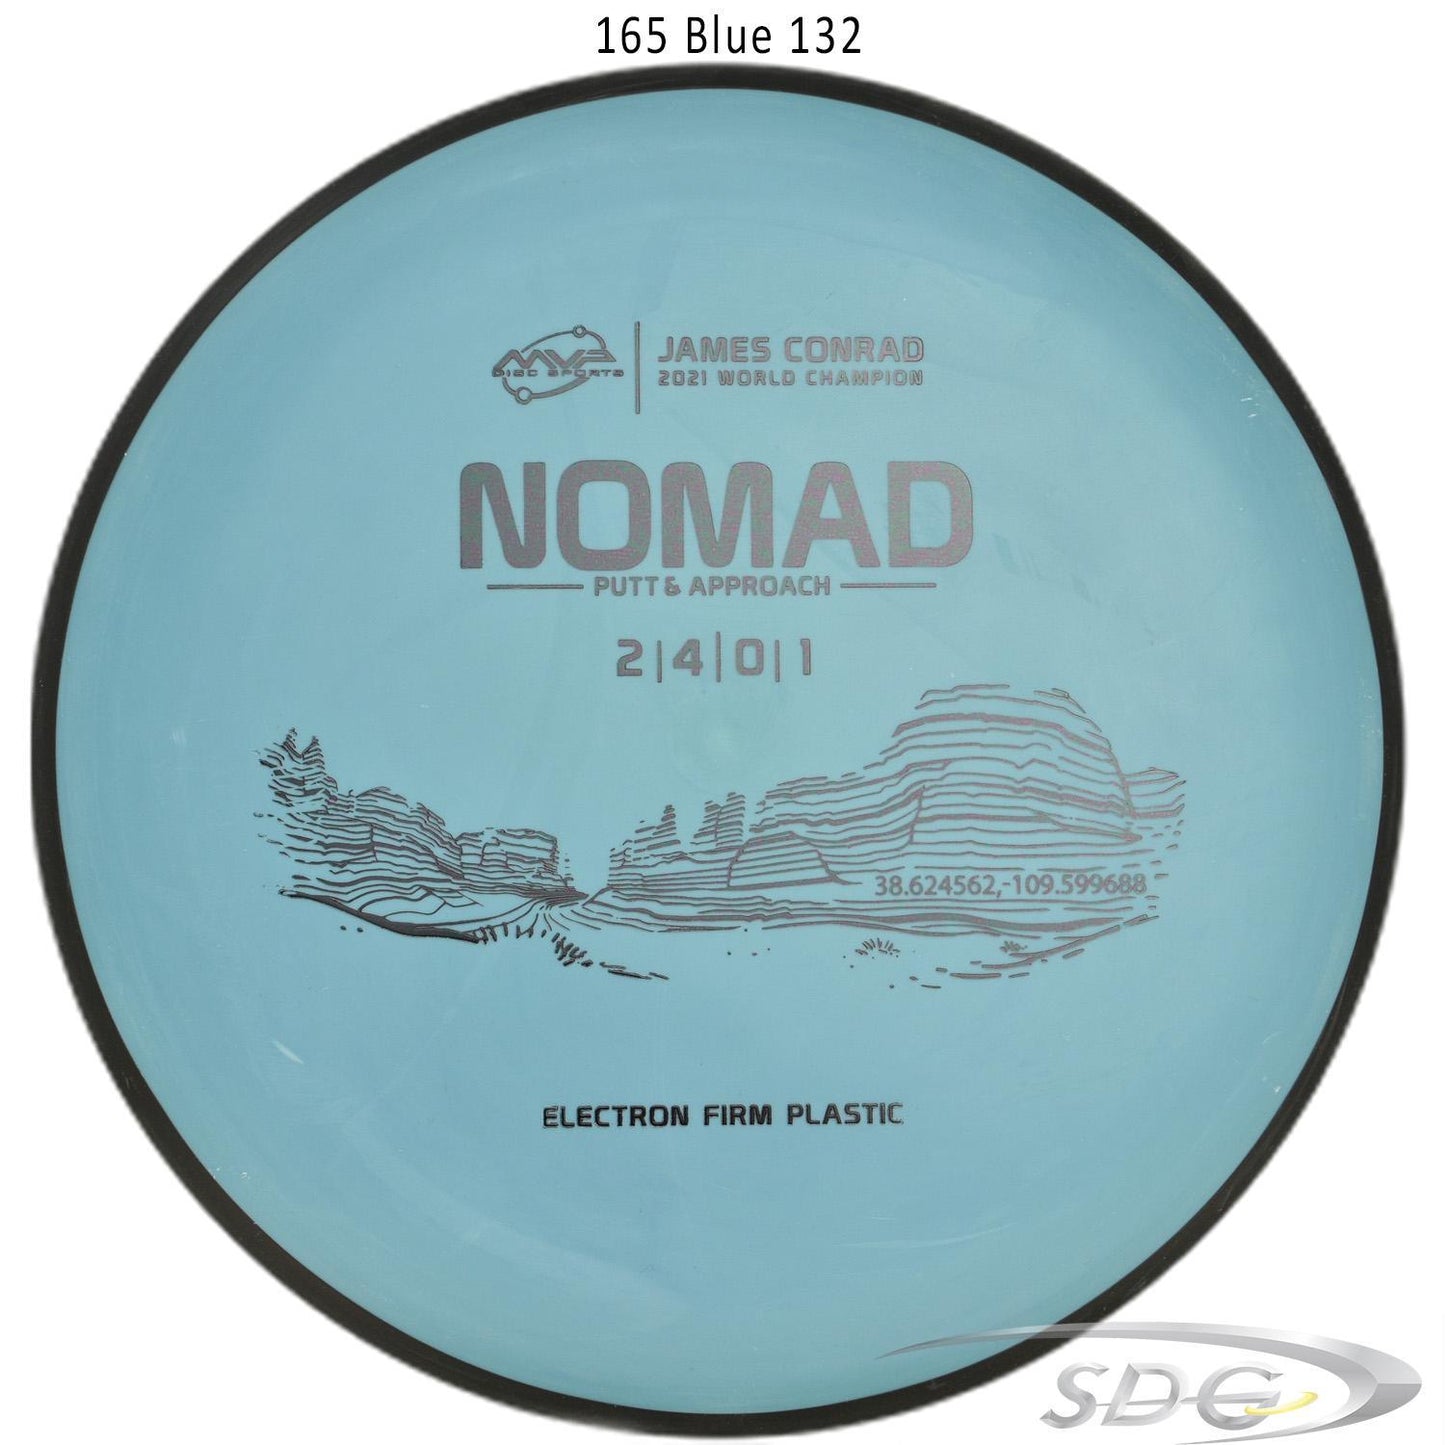 mvp-electron-nomad-firm-james-conrad-edition-disc-golf-putter 165 Blue 132 